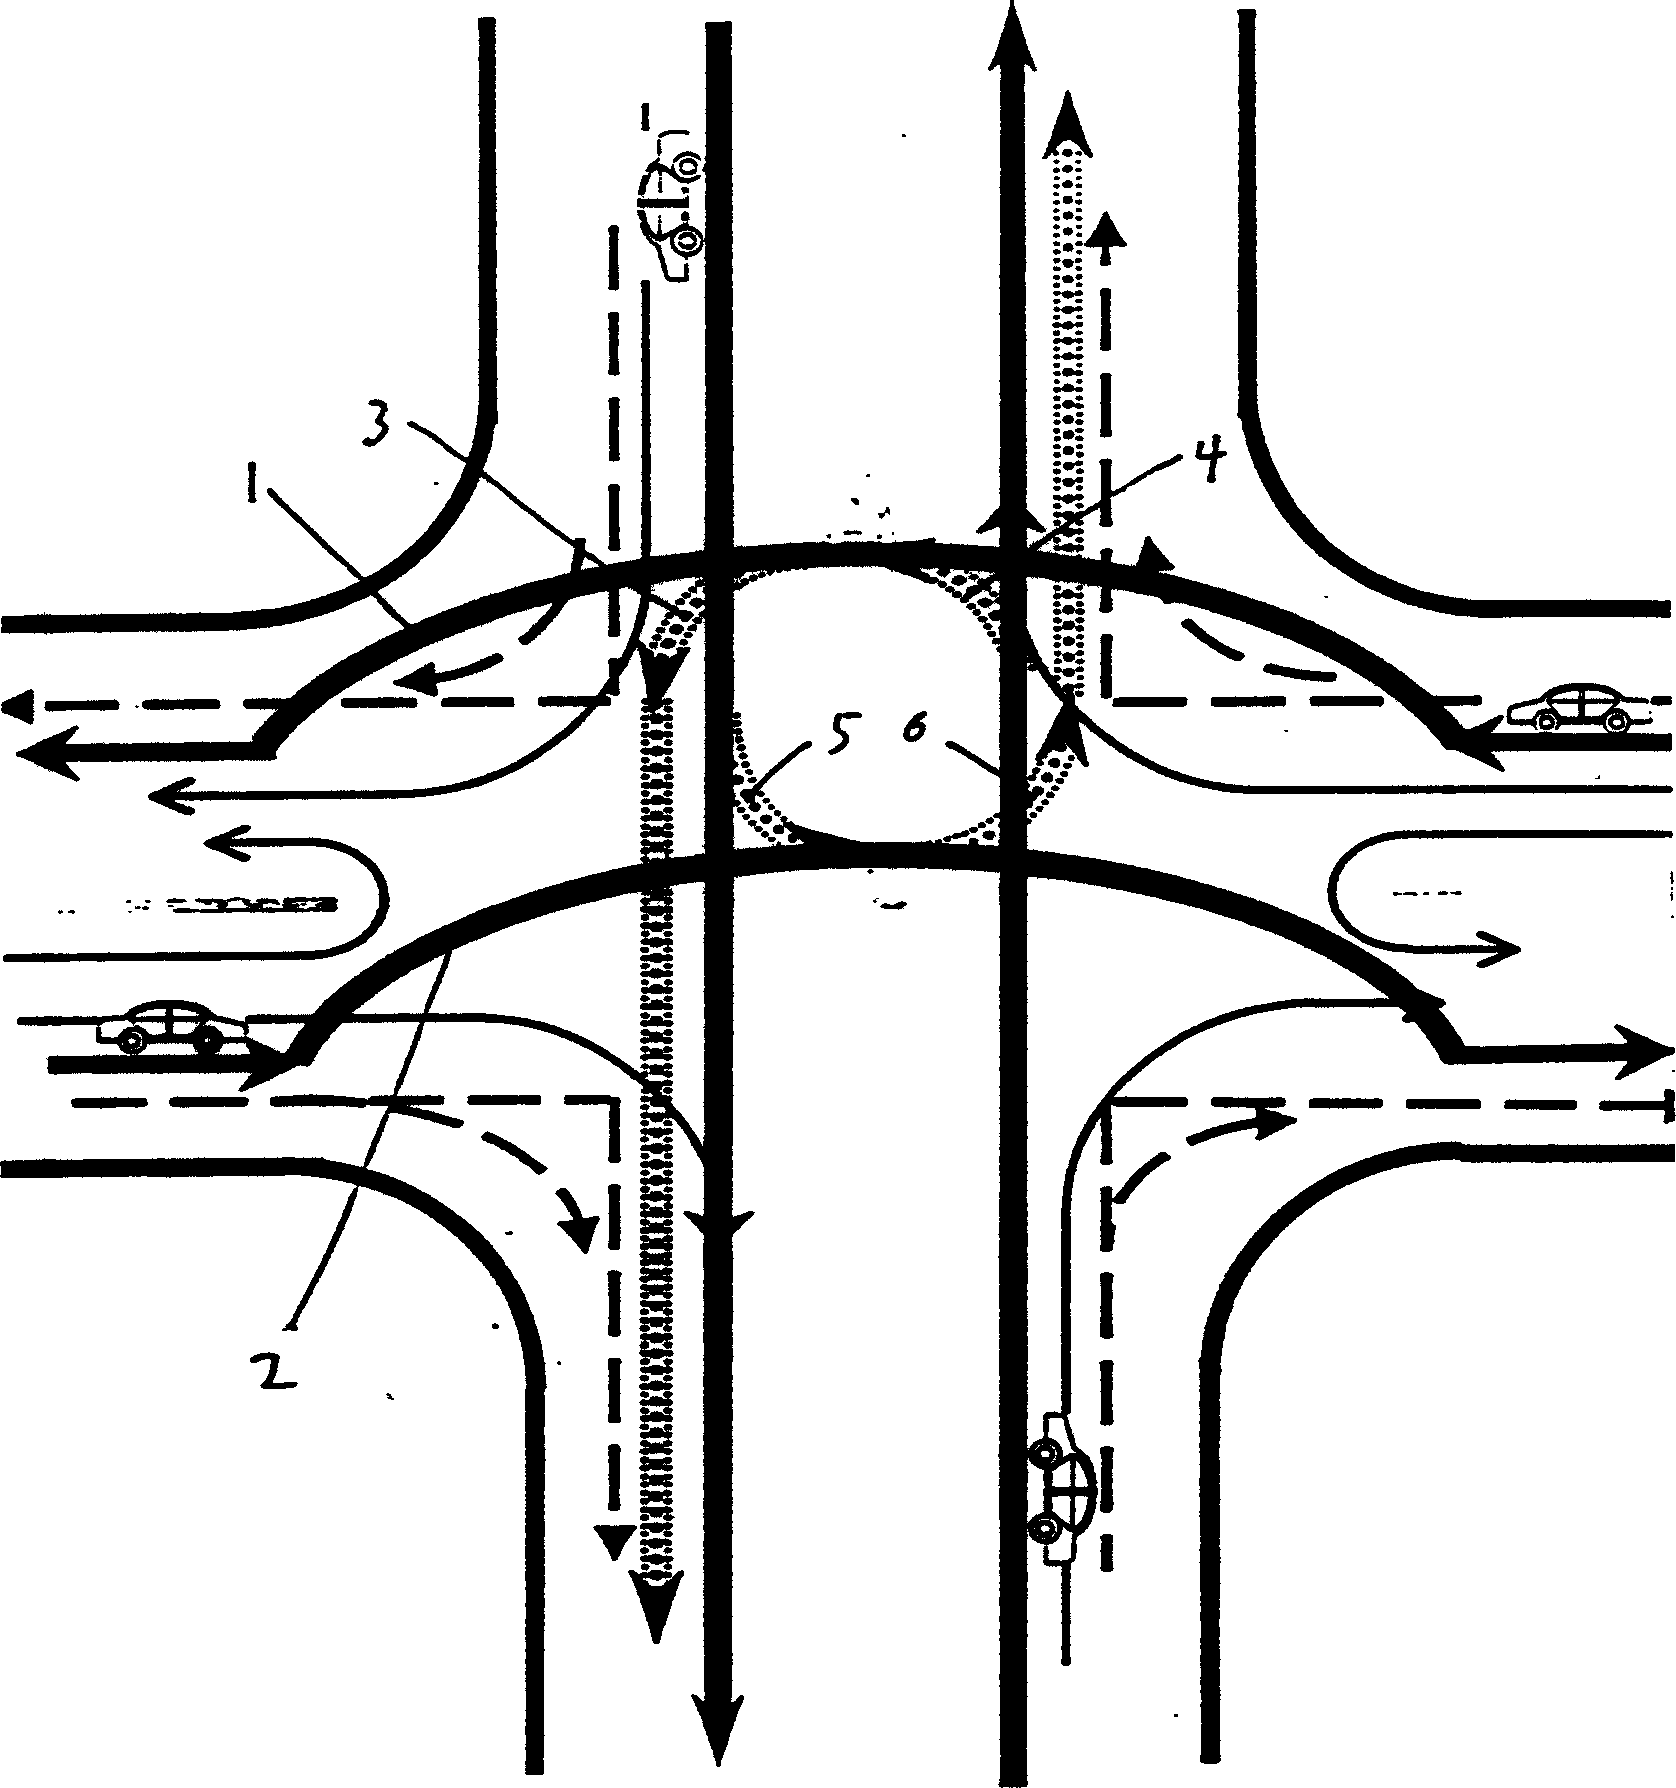 Structure of access bridge at crossroad and method for arranging access bridge at crossroad